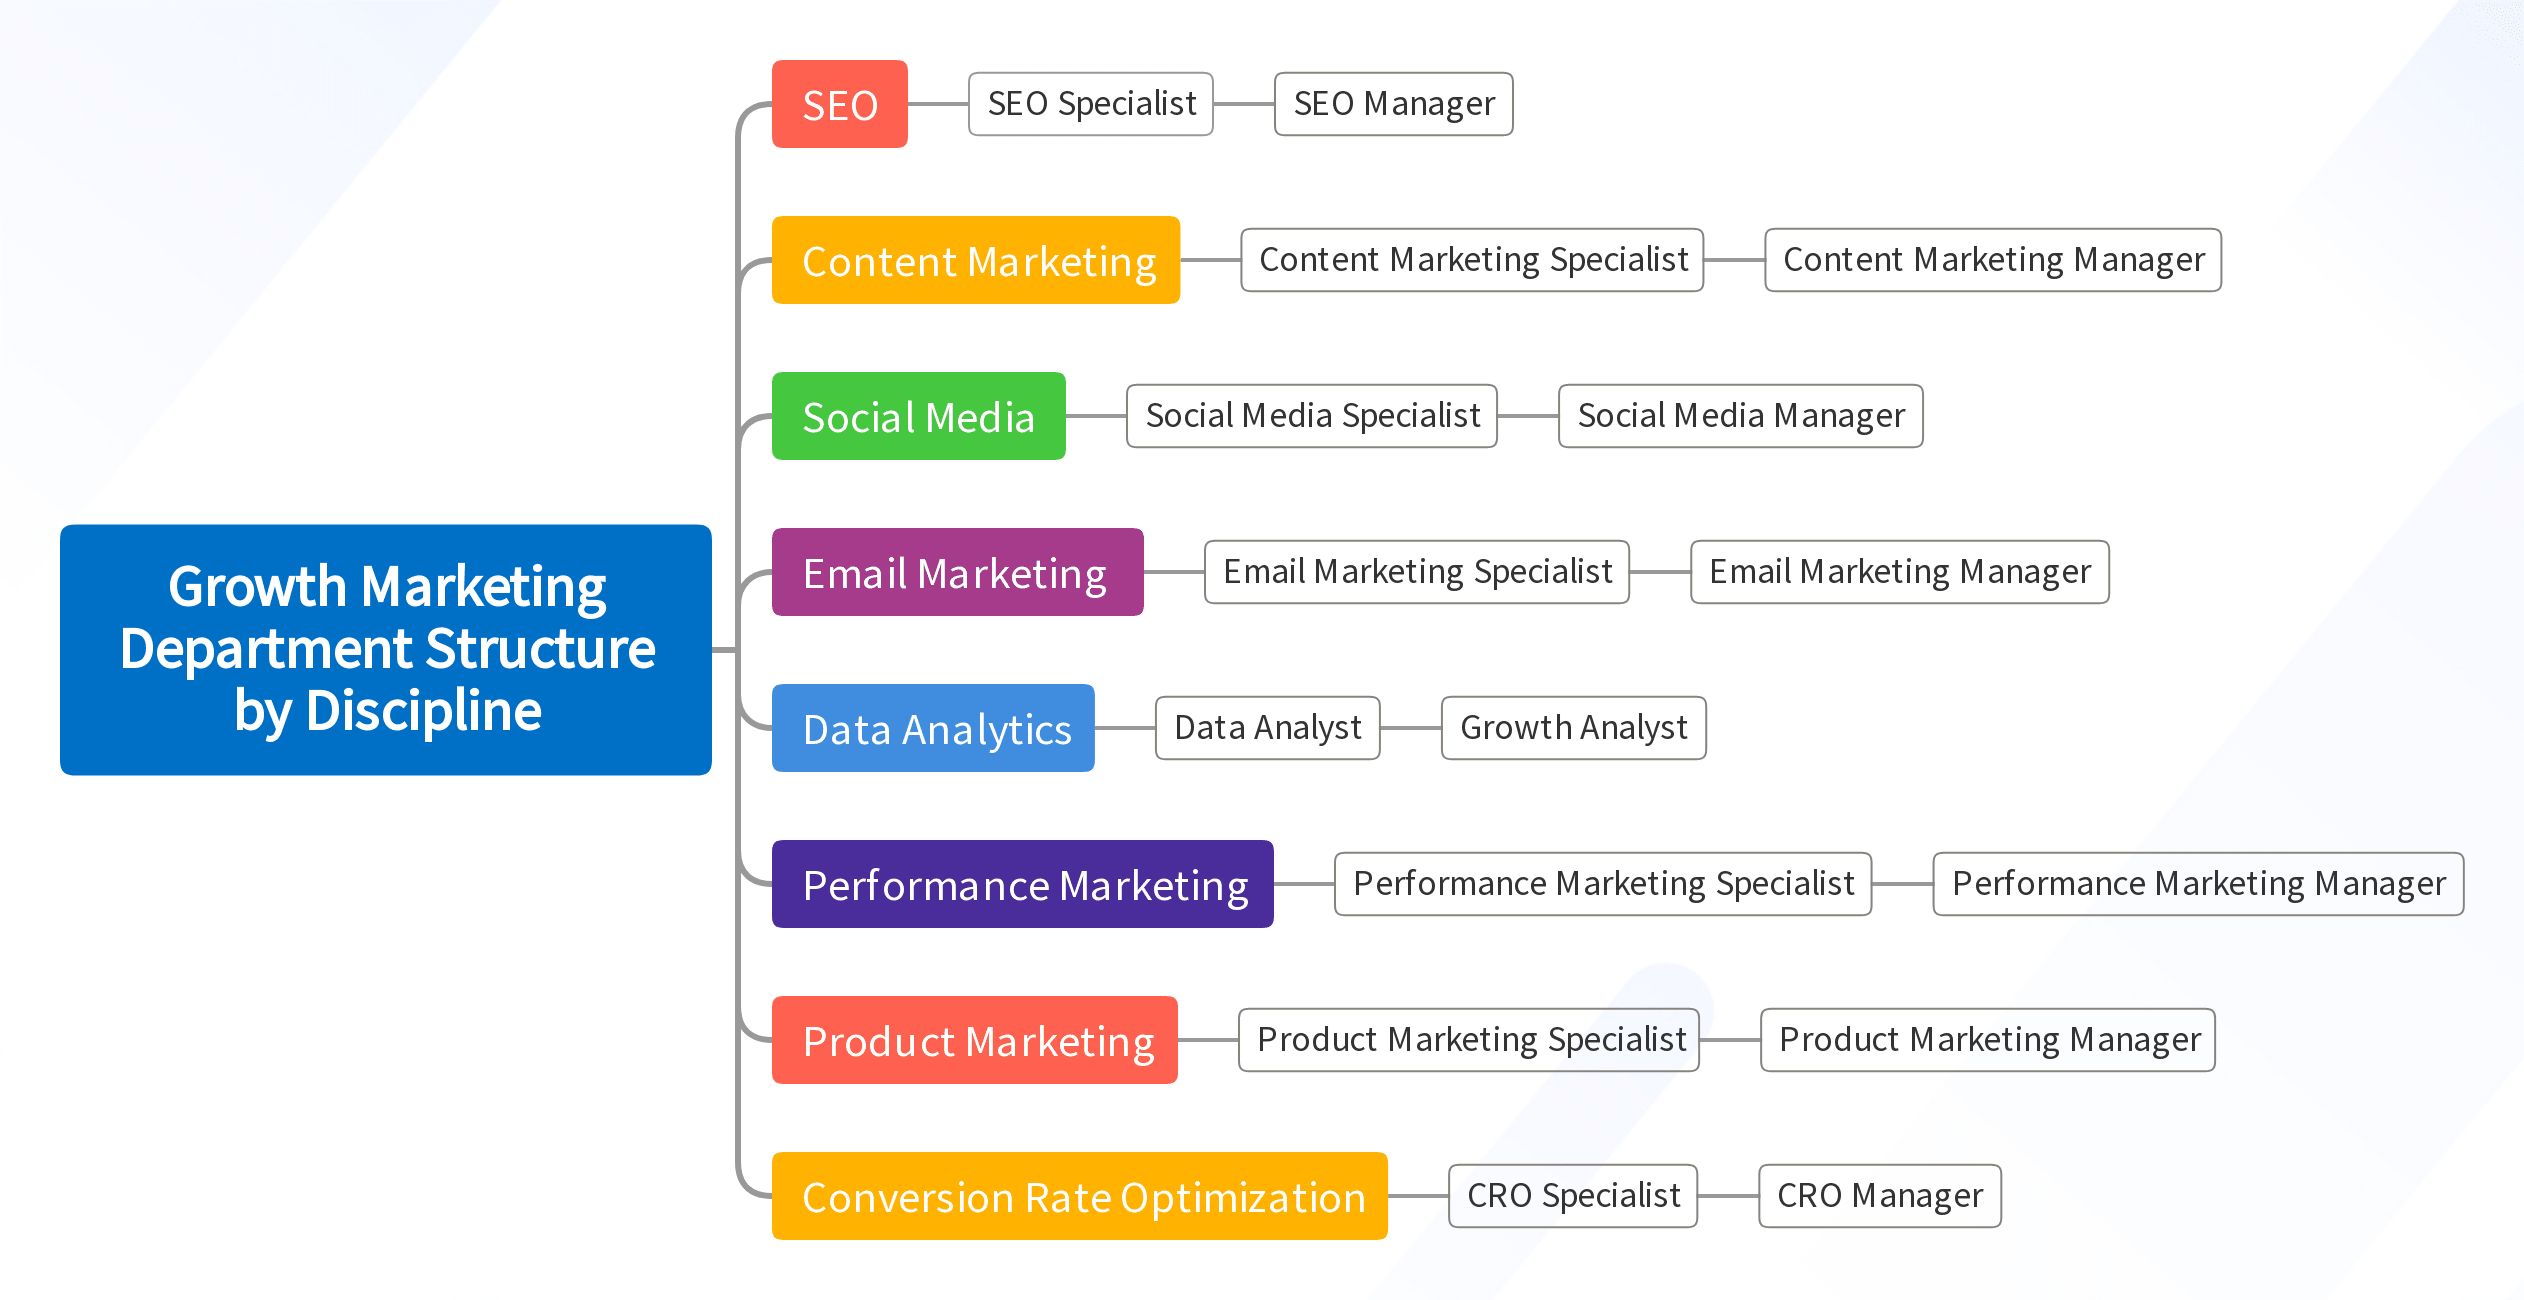 Growth Marketing Department Structure by Discipline